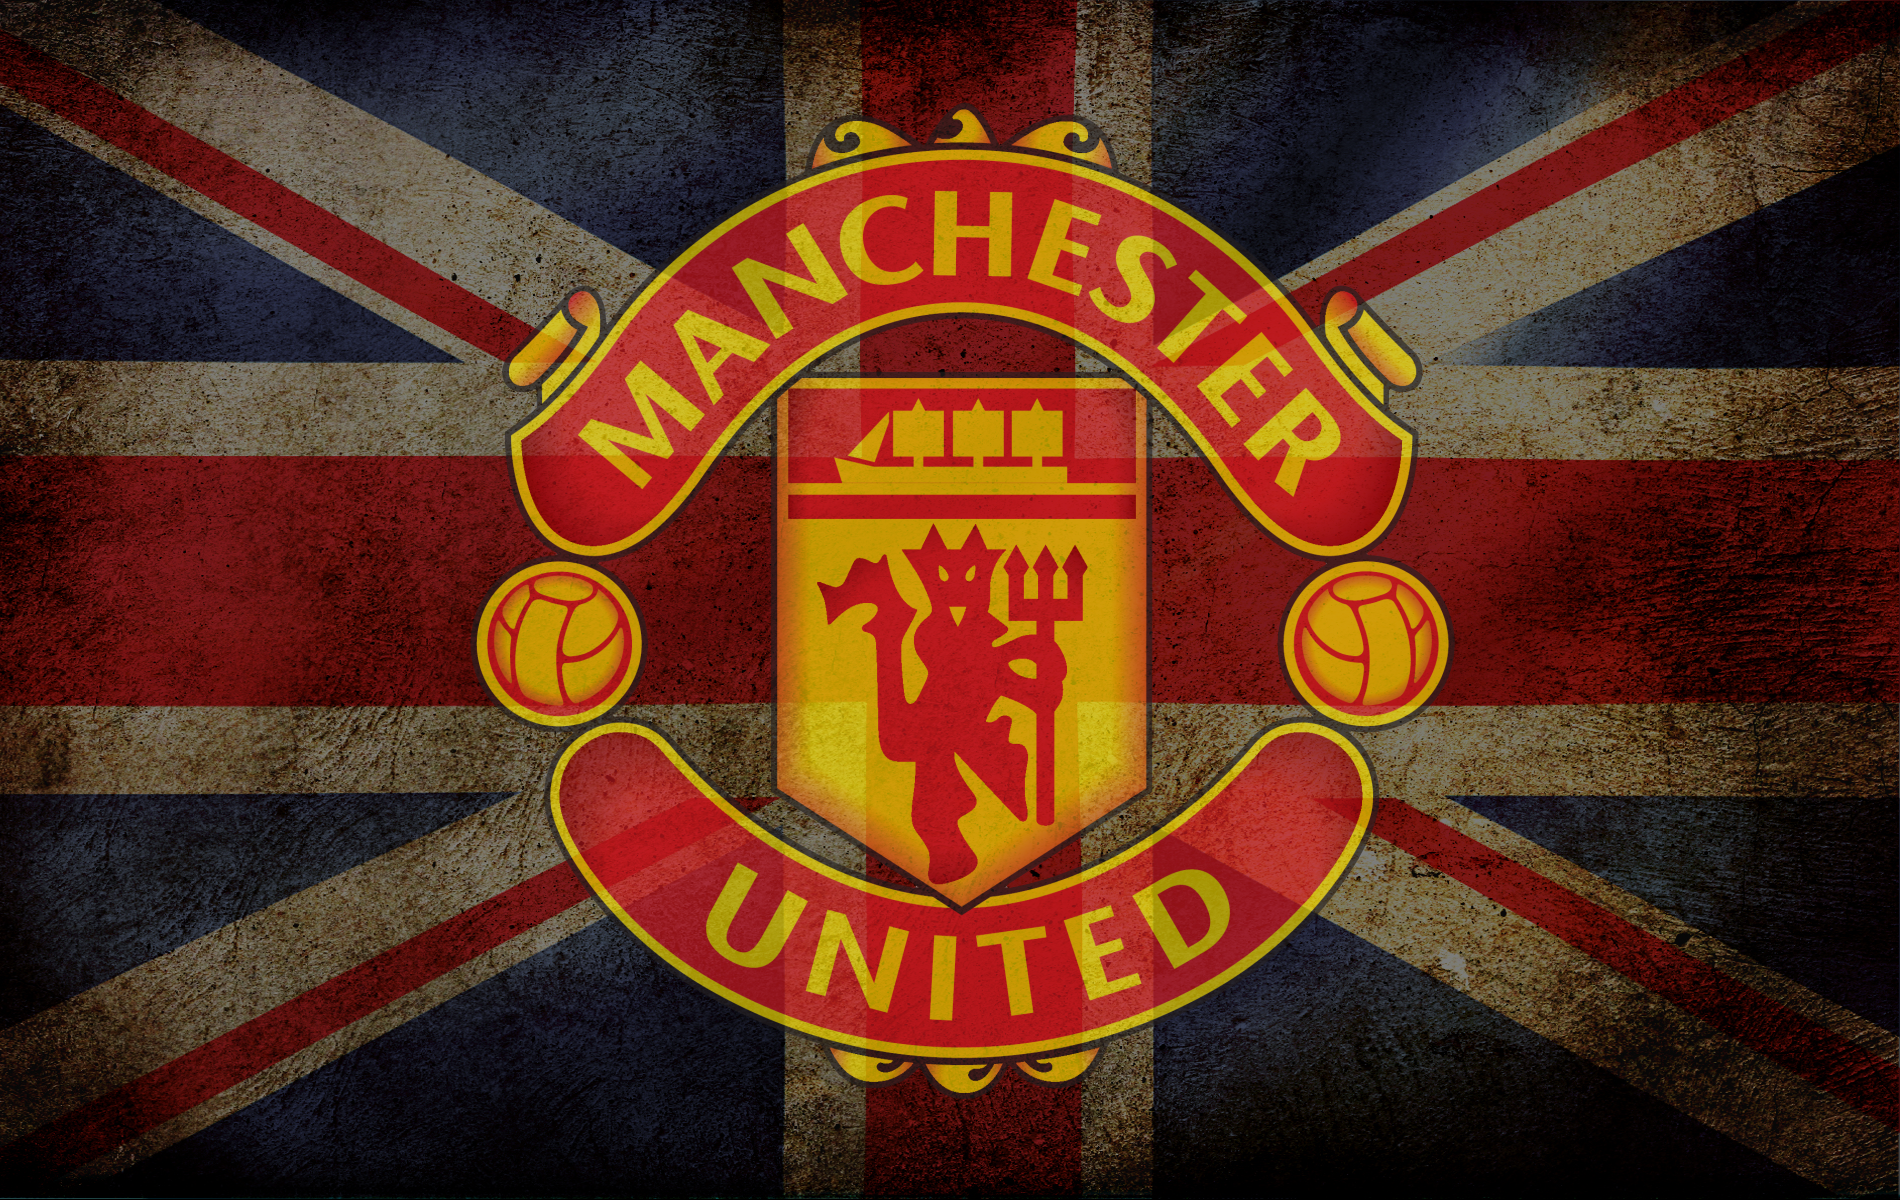 Manchester United Fire Logo Wallpaper HD With